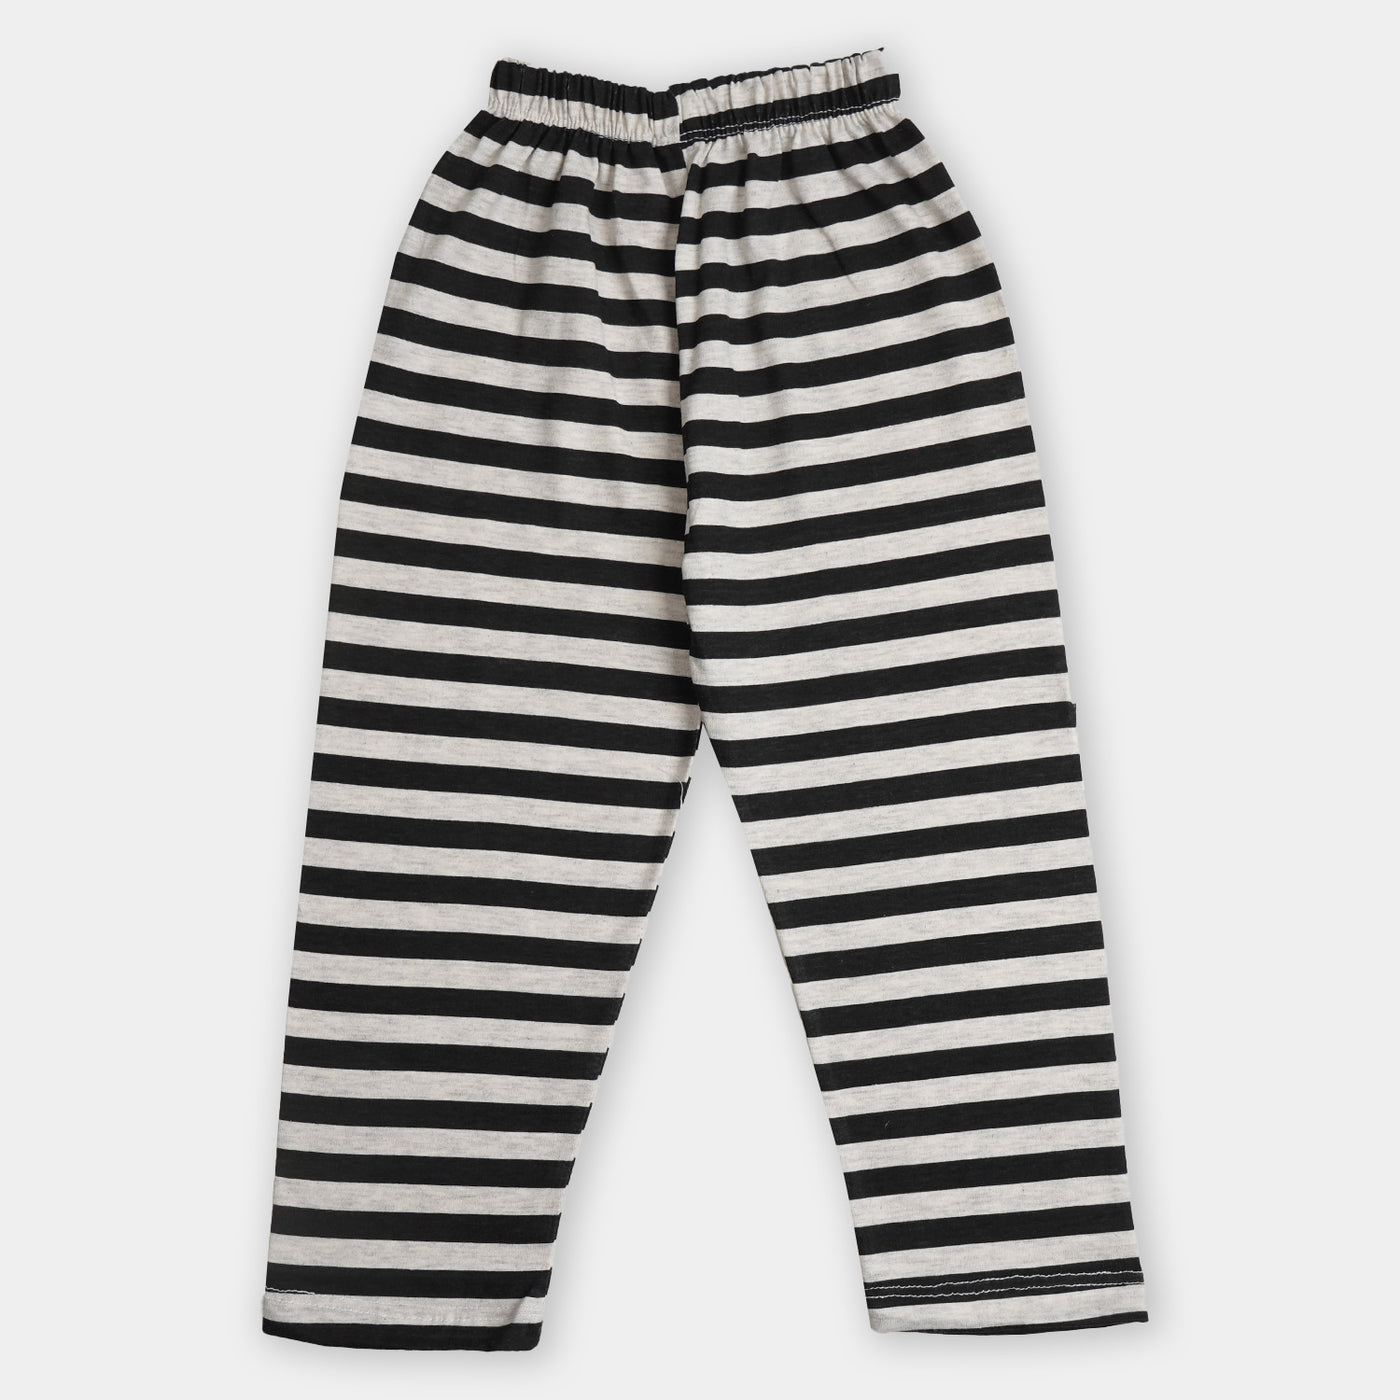 Boys Knitted Night Wear Character- Black / White